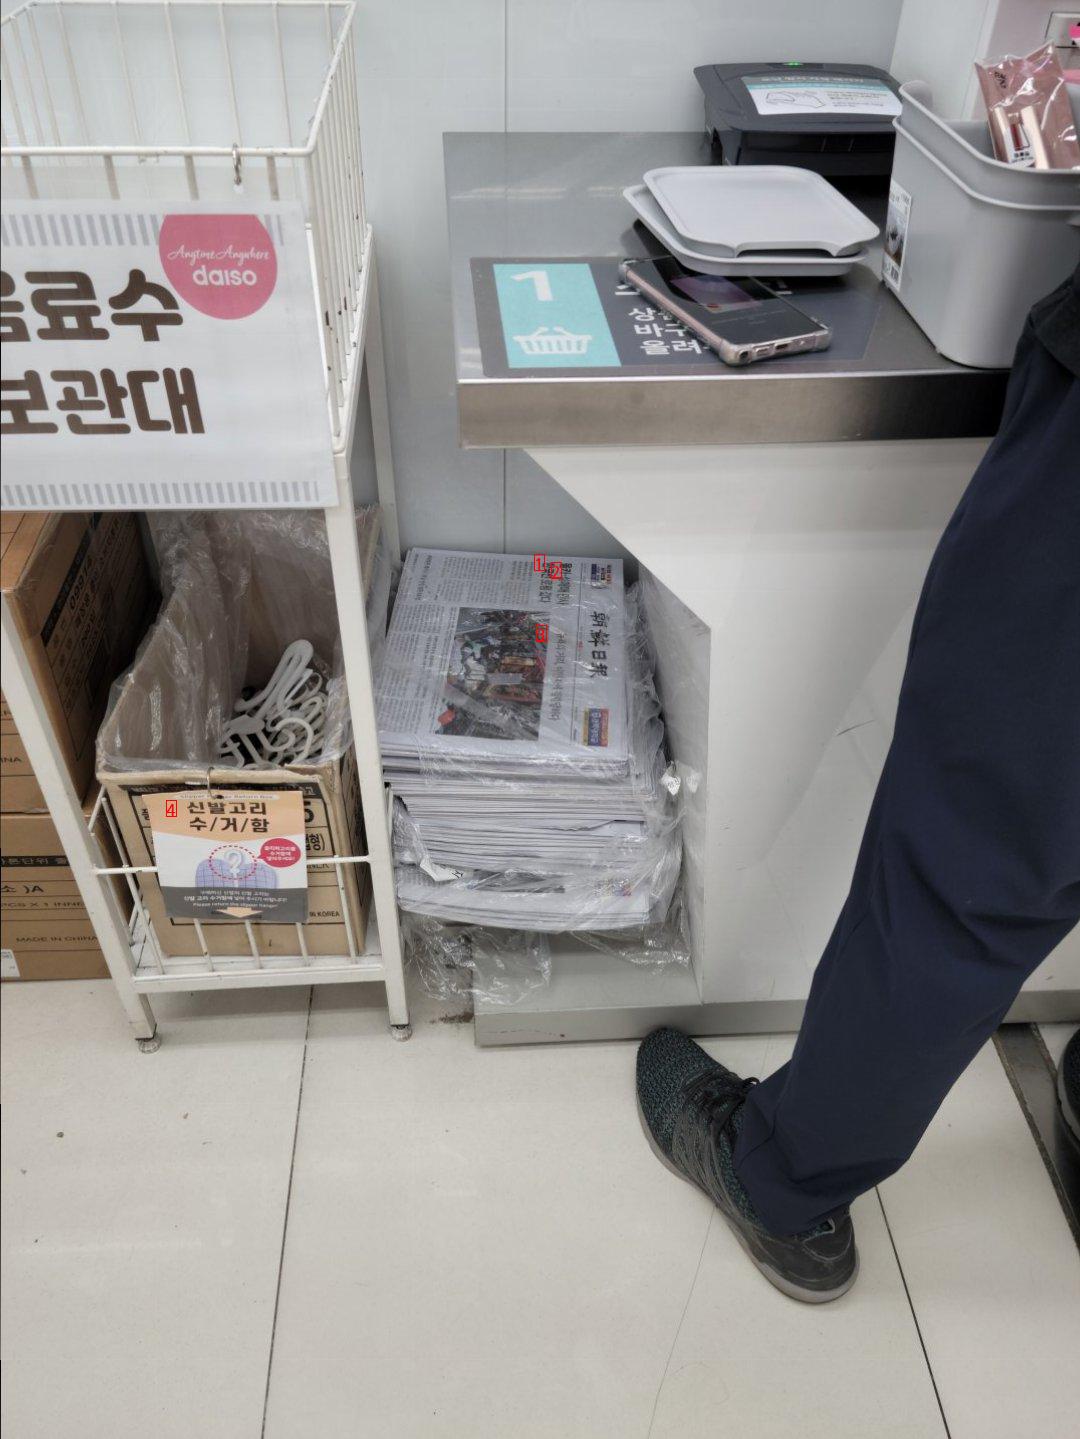 The newspaper that finally found its place in Korea